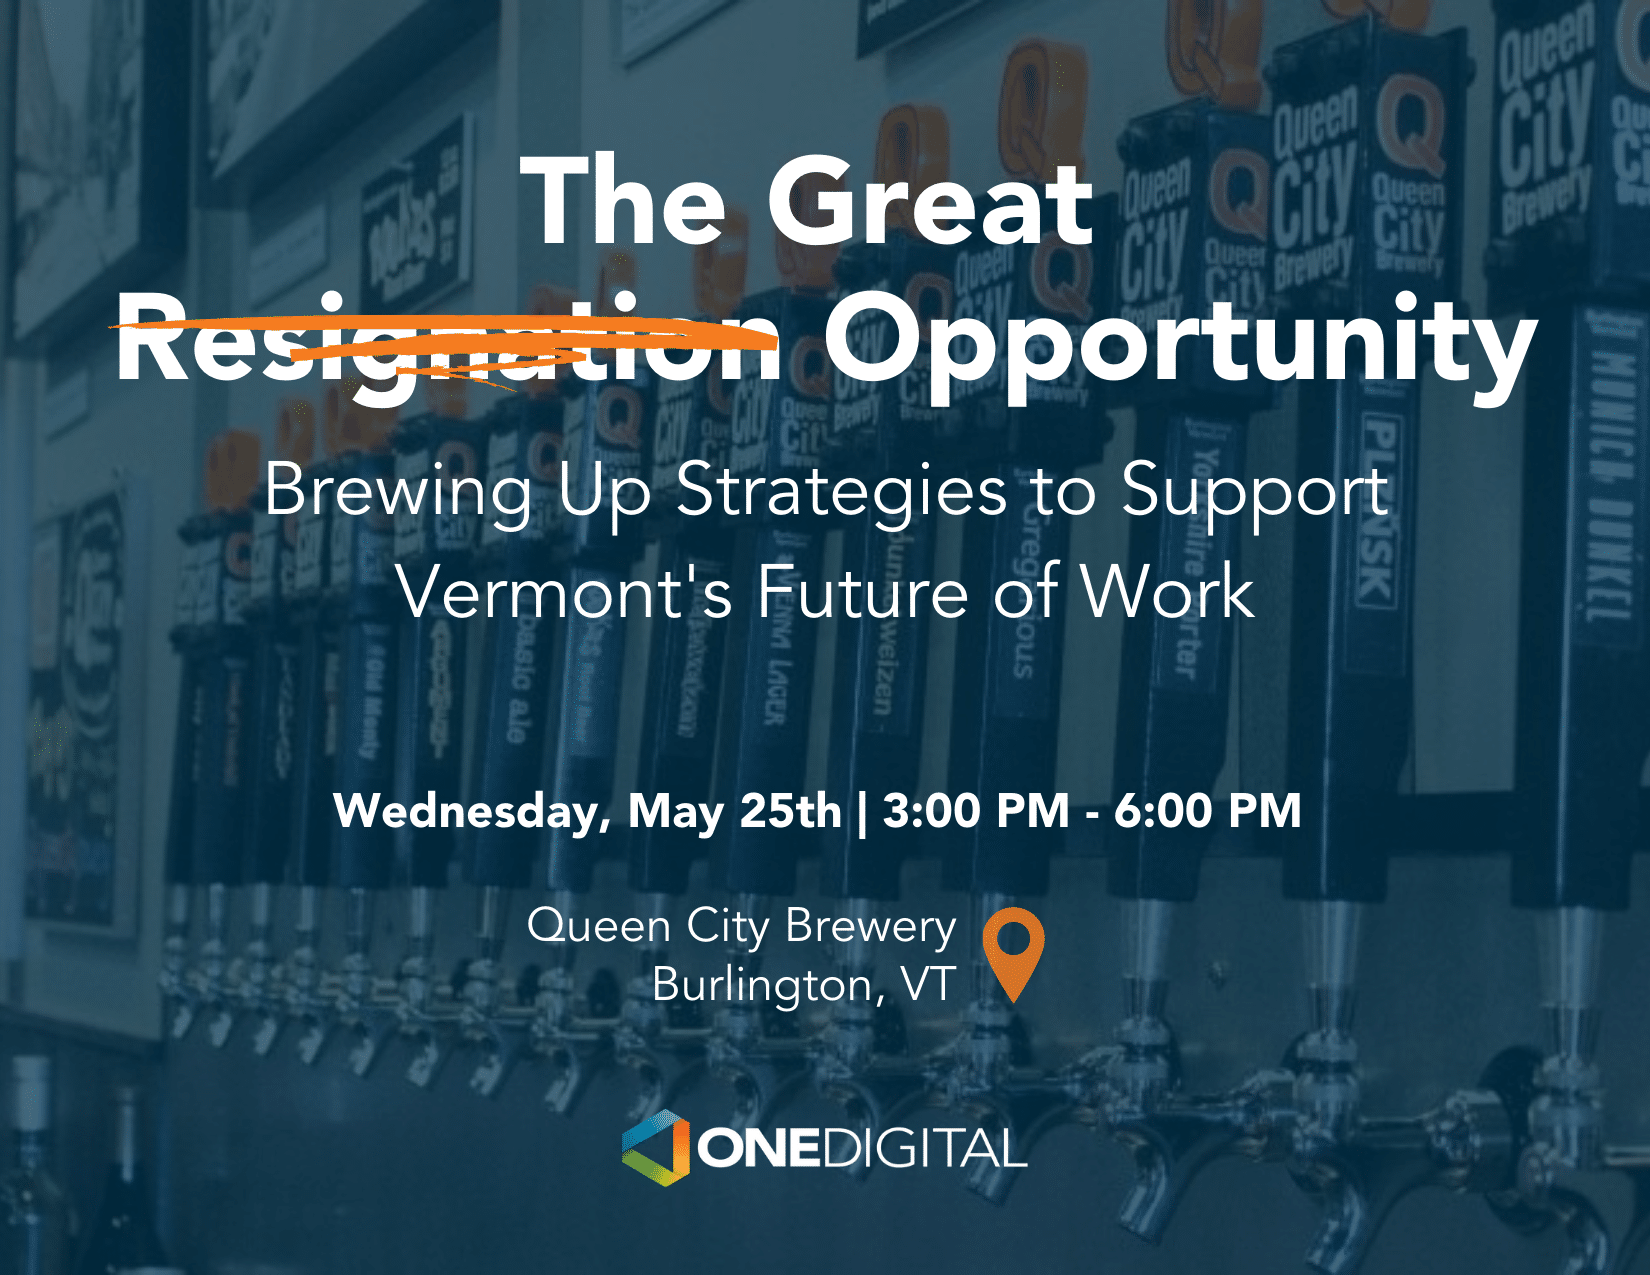 The Great Opportunity: Brewing Up Strategies to Support VT's Future of Work